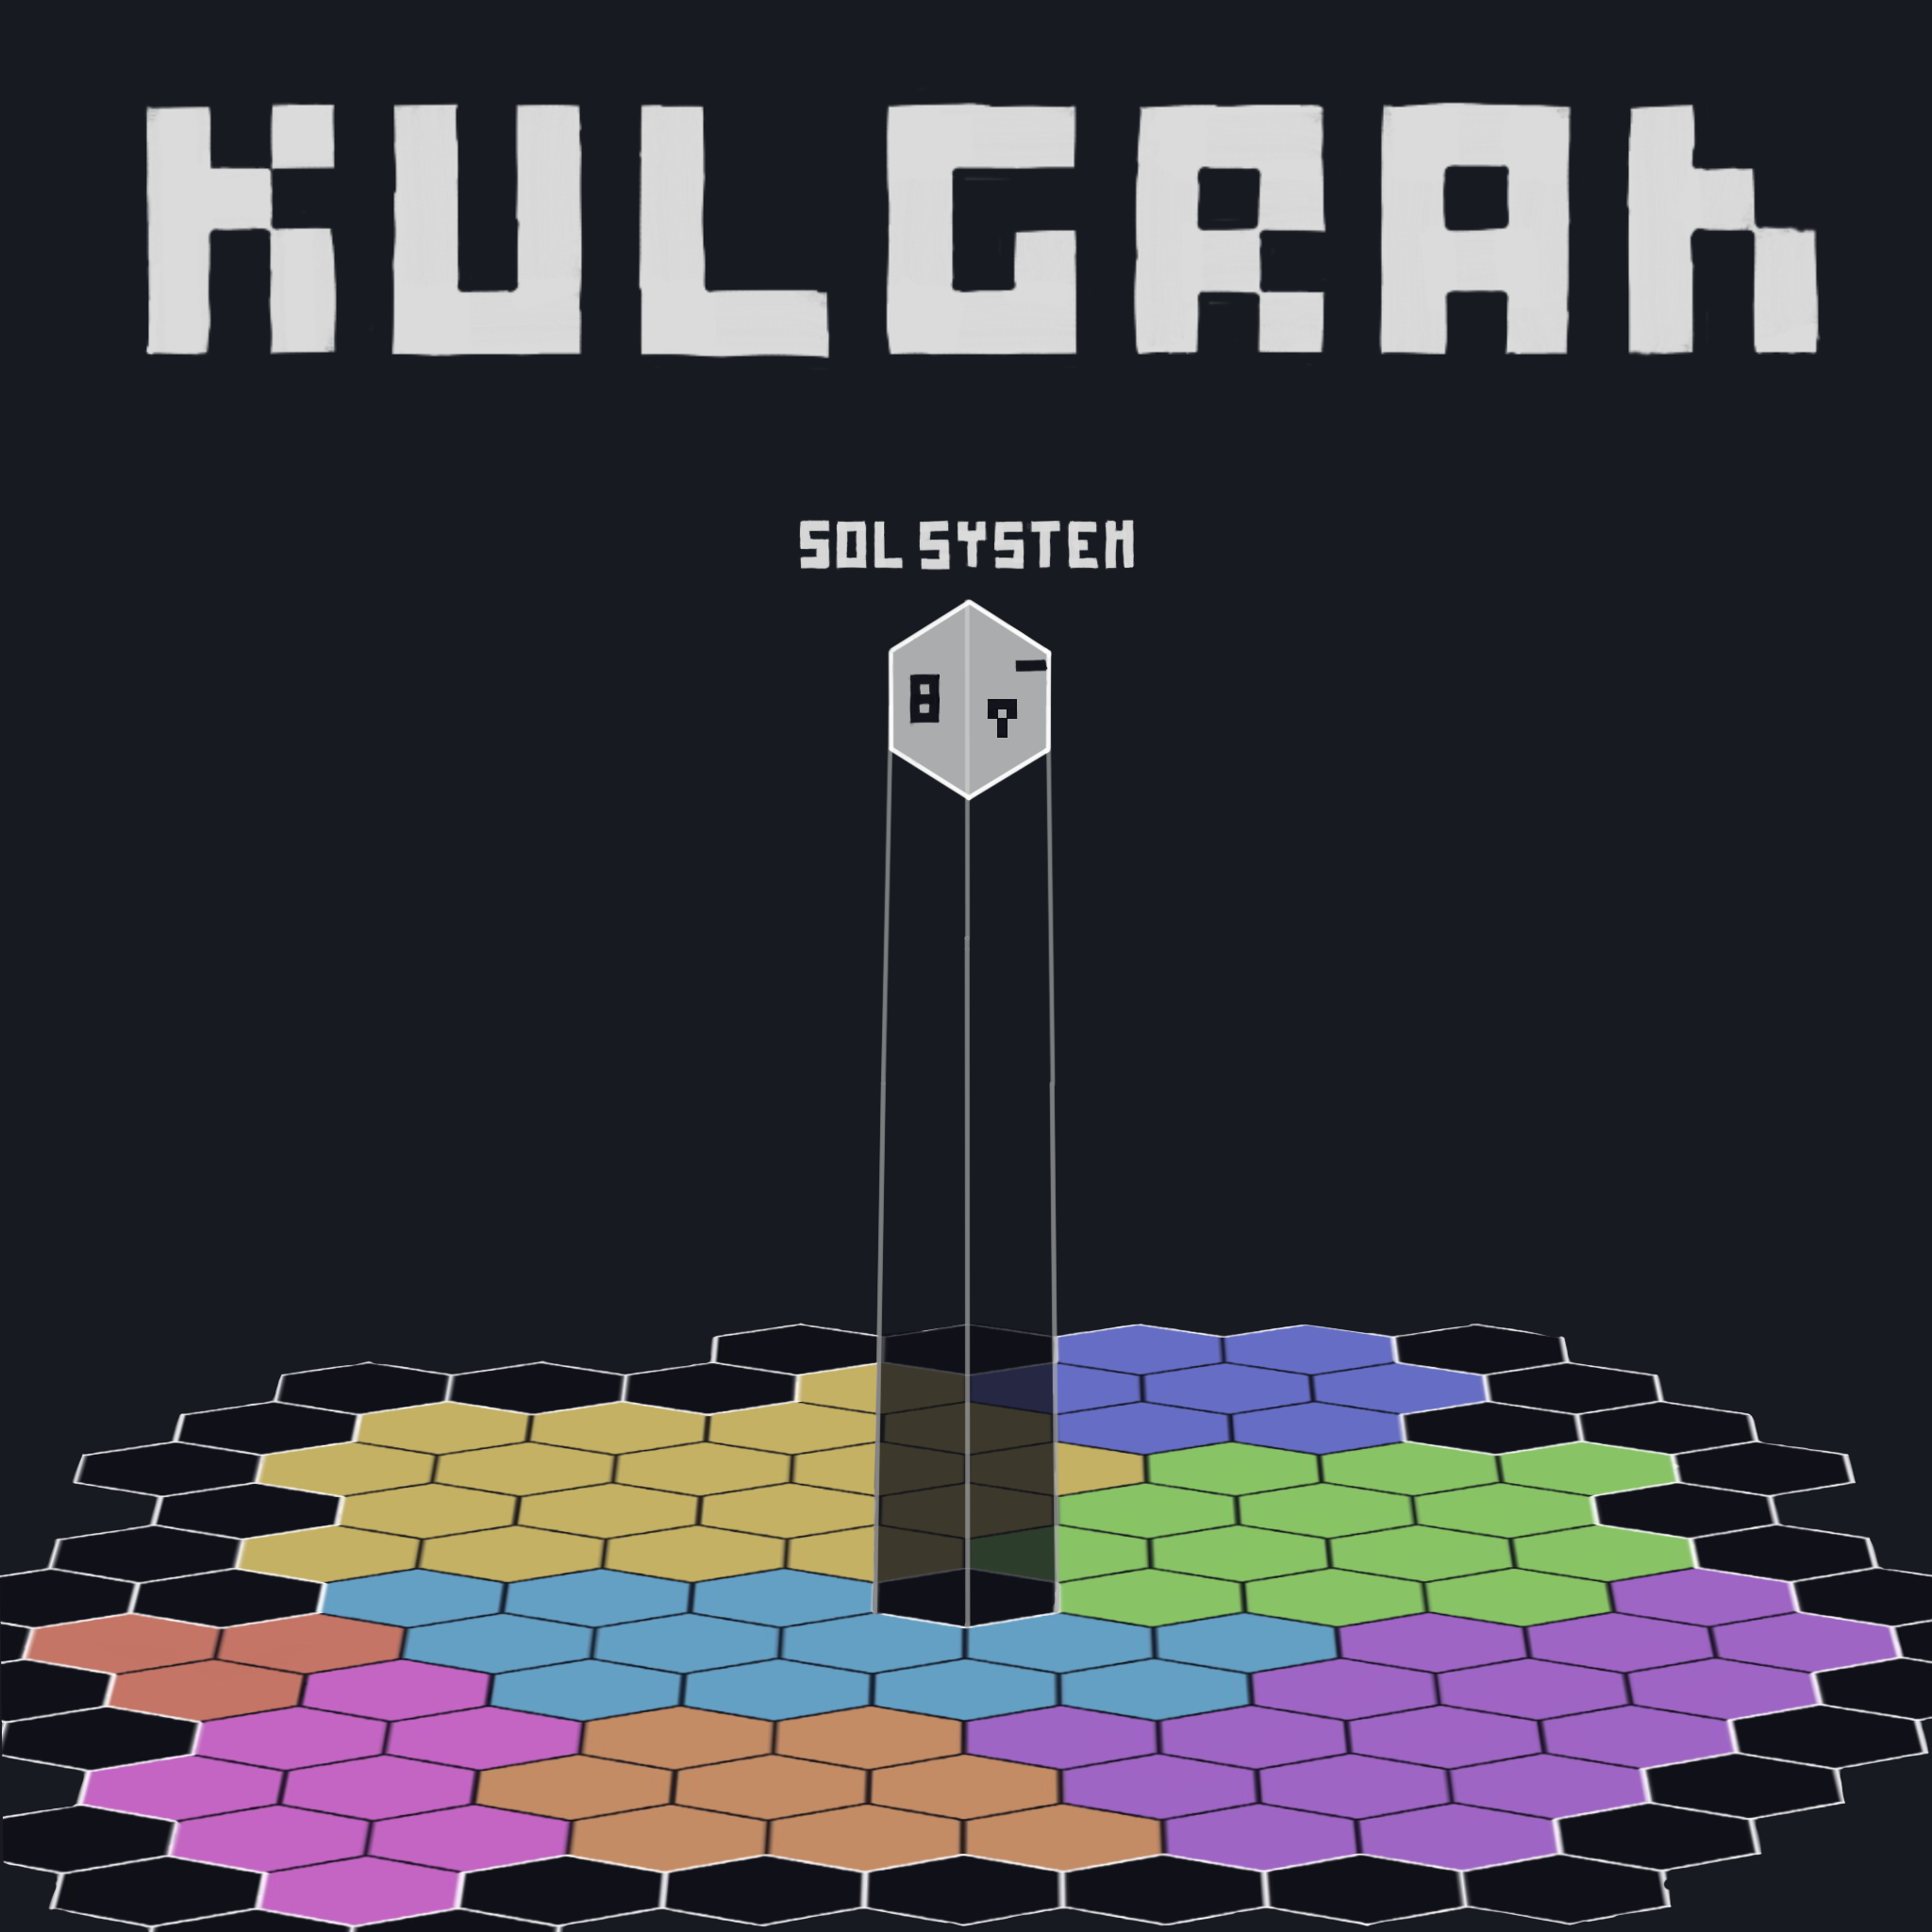 A hex map with one hex popping out of it with some symbols in it and the words "Sol System" on top of it. On top of the image there's written "Khulgran"